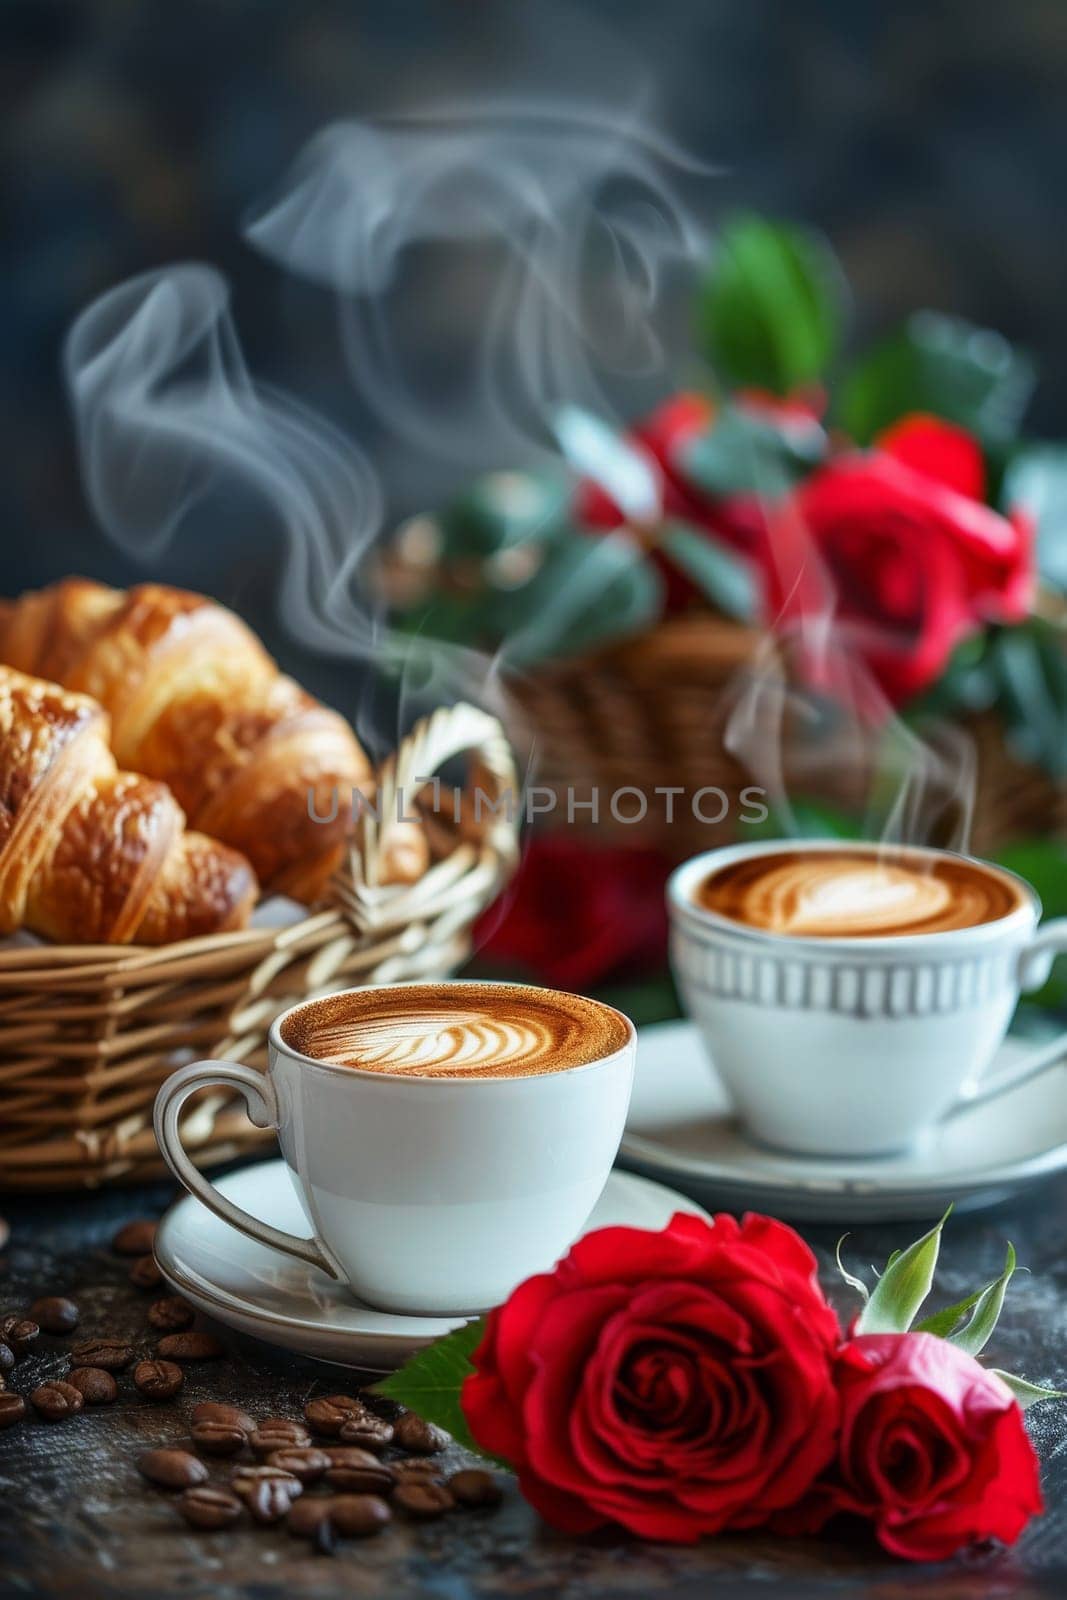 A white coffee cup with a rose on top sits next to another white coffee cup. The cups are filled with coffee and there are some coffee beans on the table